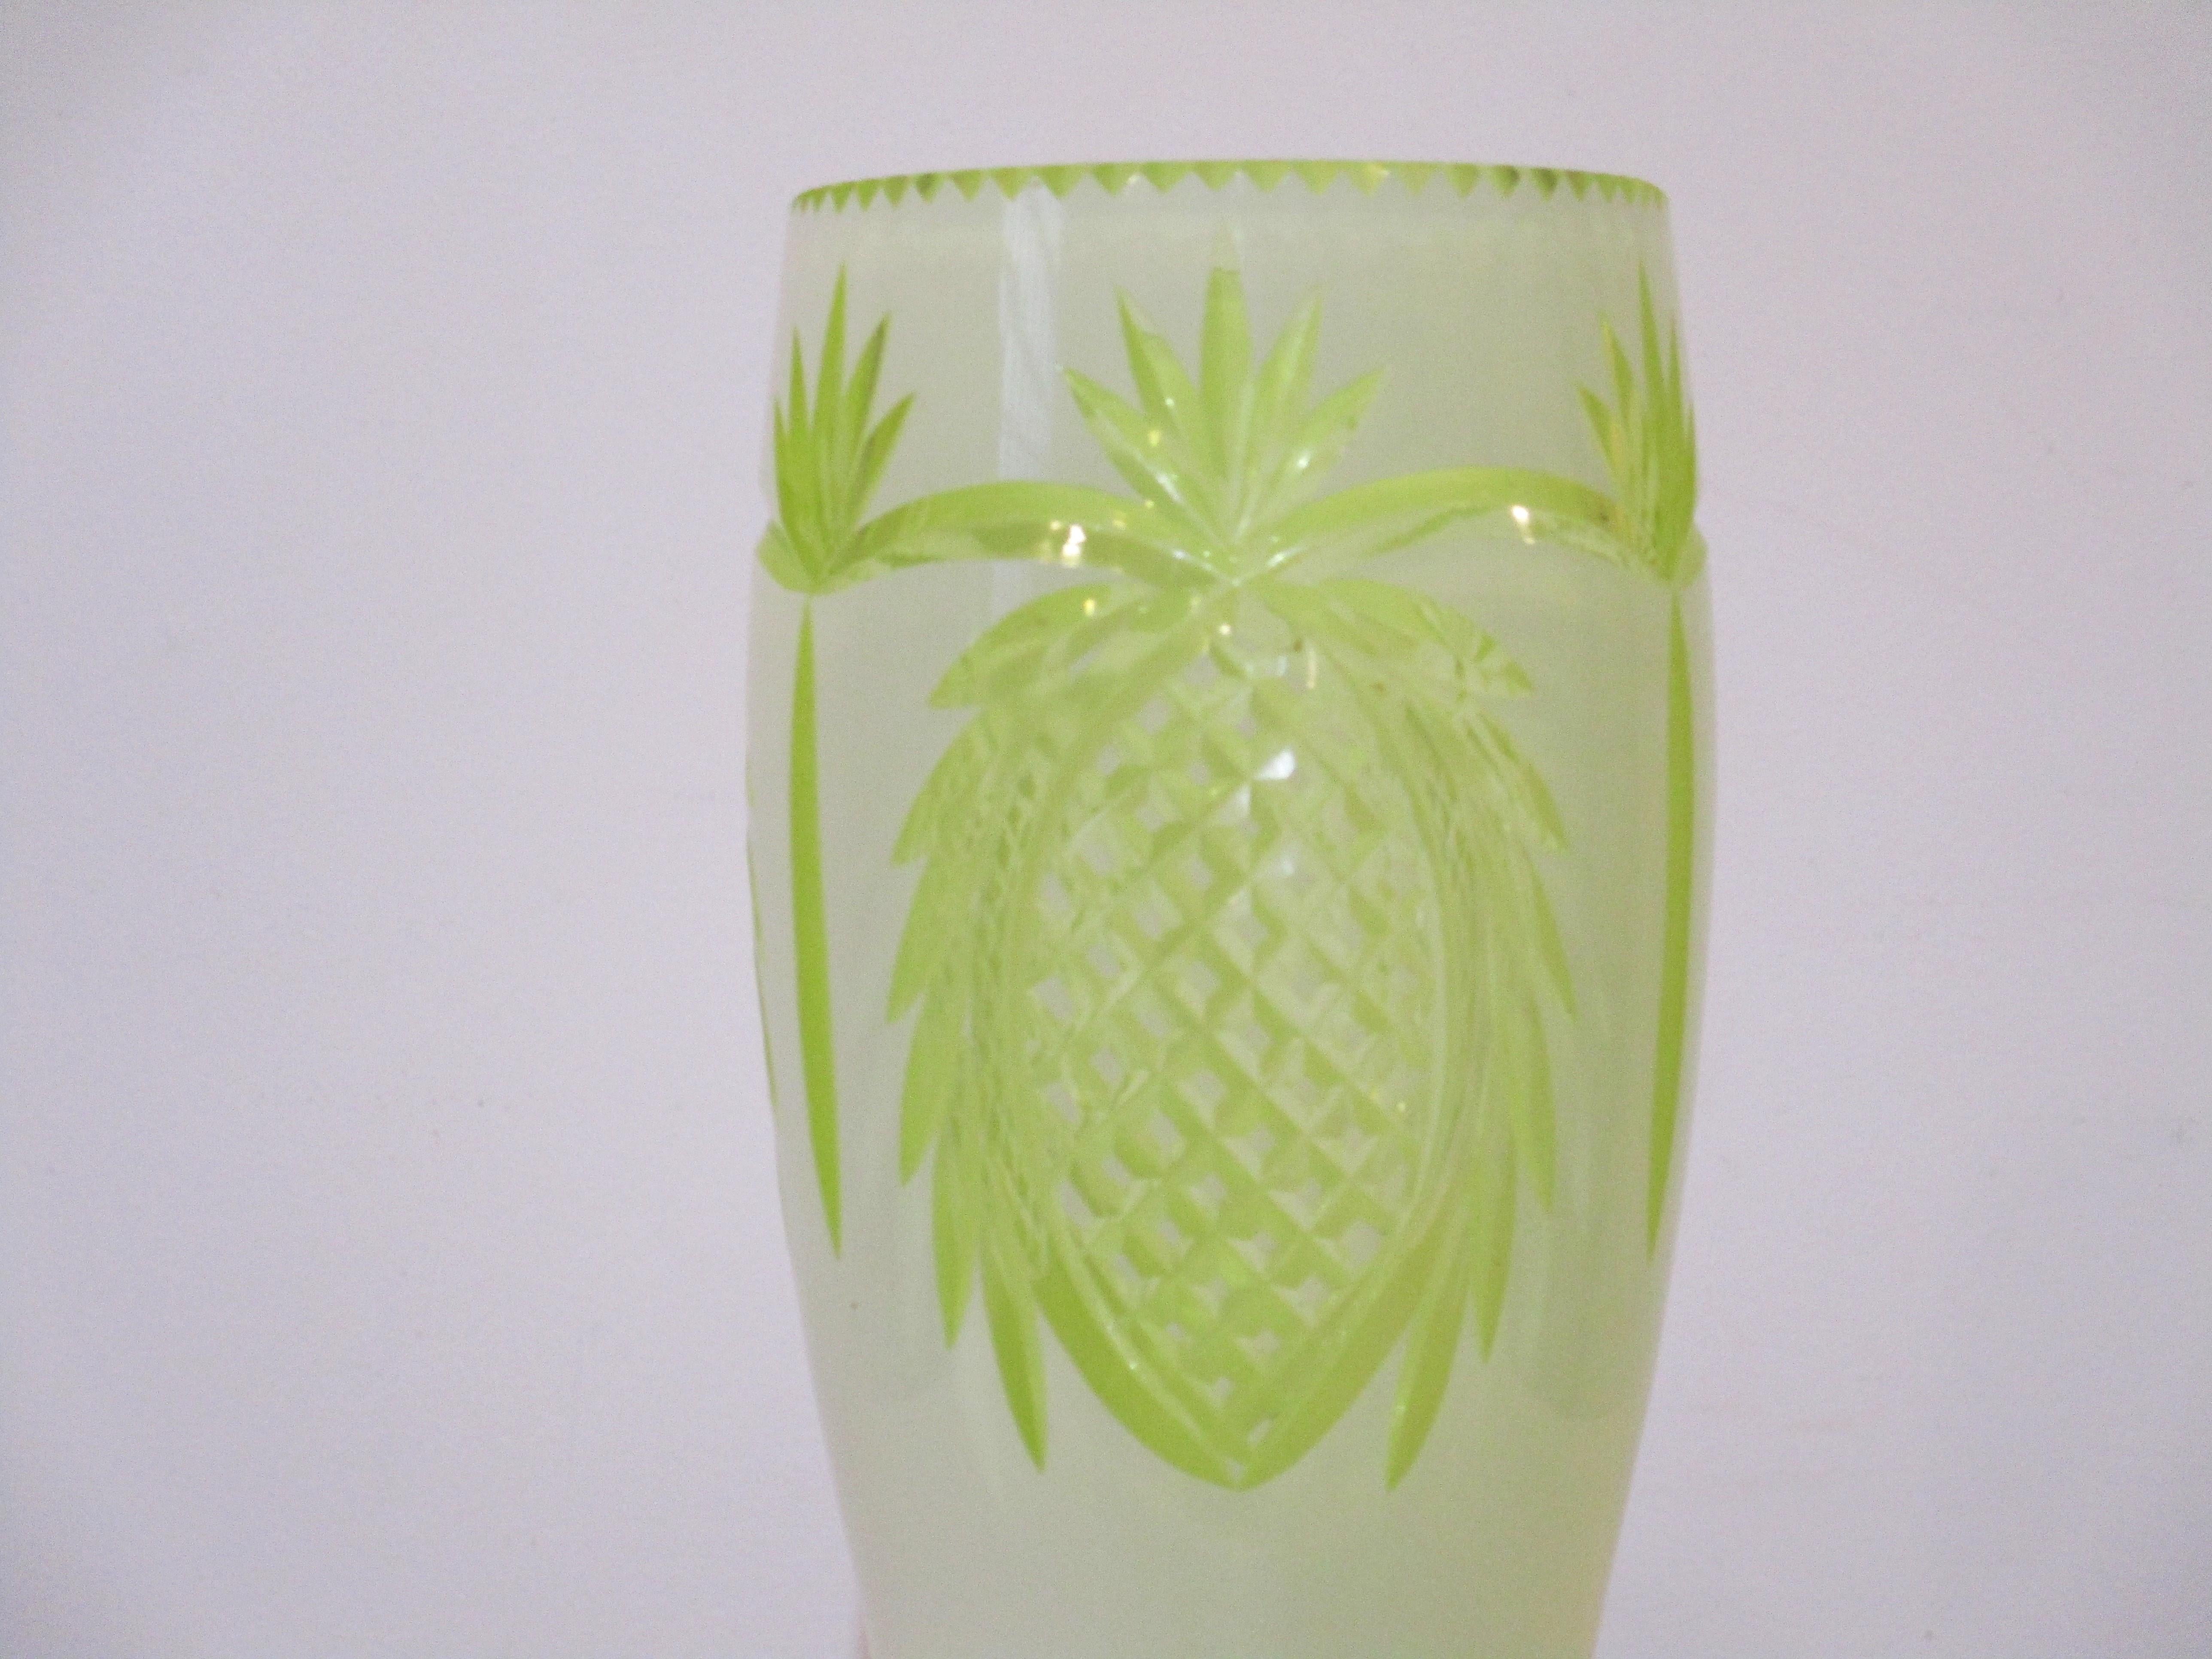 A very nice hand cut and polished Bohemian glass vase in a cream white and lemon color . This vase depicts pineapples and palm trees which is very different for the typical Bohemian glass that we've seen . Great top rib cuts to the edge and